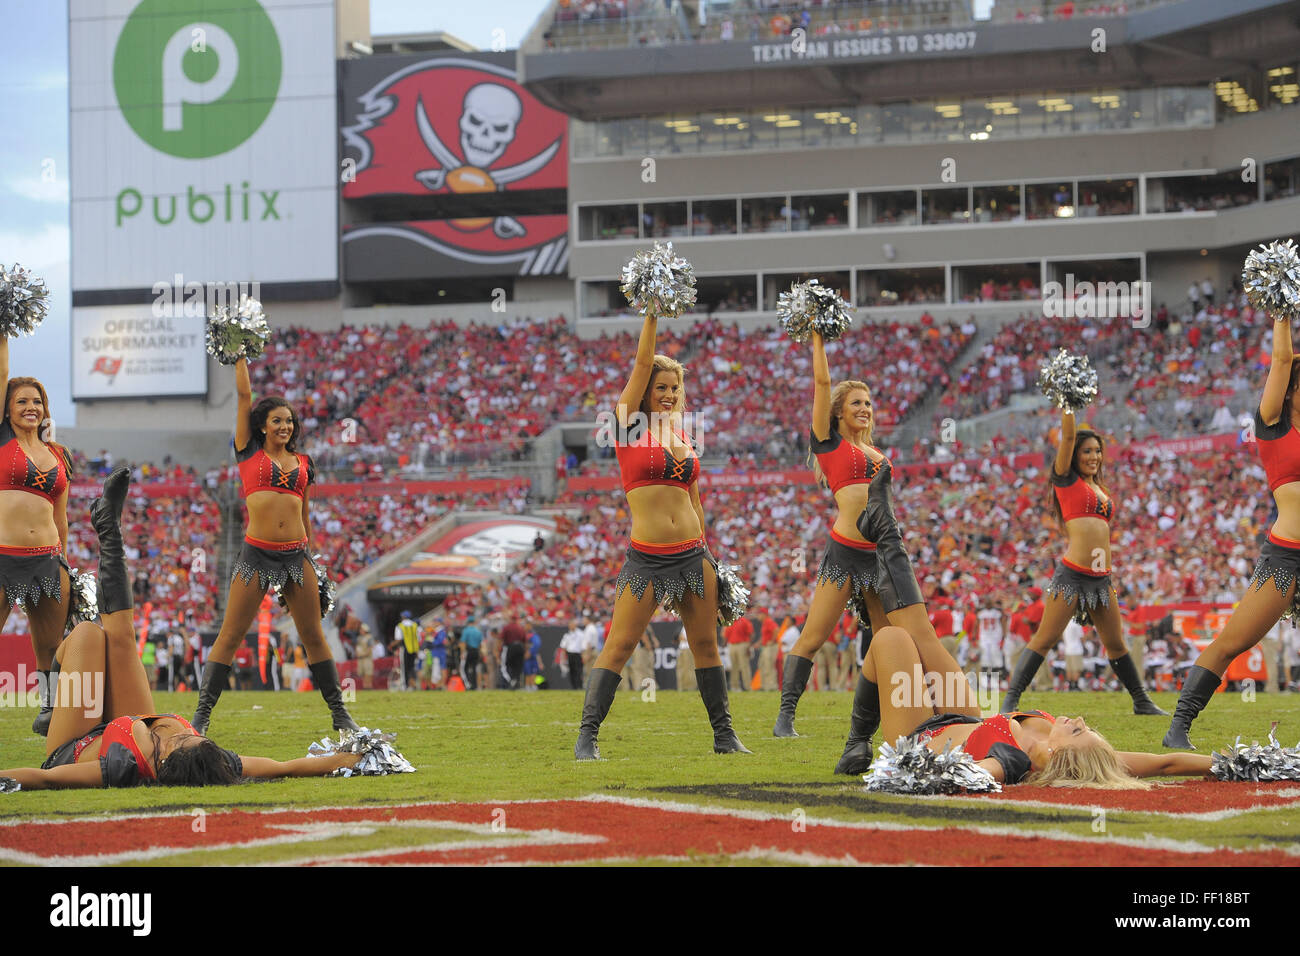 Sept. 14, 2014 - Tampa, Florida, USA - Tampa Bay Buccaneers cheerleaders during the Bucs game against the St. Louis Rams at Raymond James Stadium on Sept. 14, 2014 in Tampa, Florida. St. Louis won 19-17. .ZUMA PRESS/Scott A. Miller (Credit Image: © Scott A. Miller via ZUMA Wire) Stock Photo